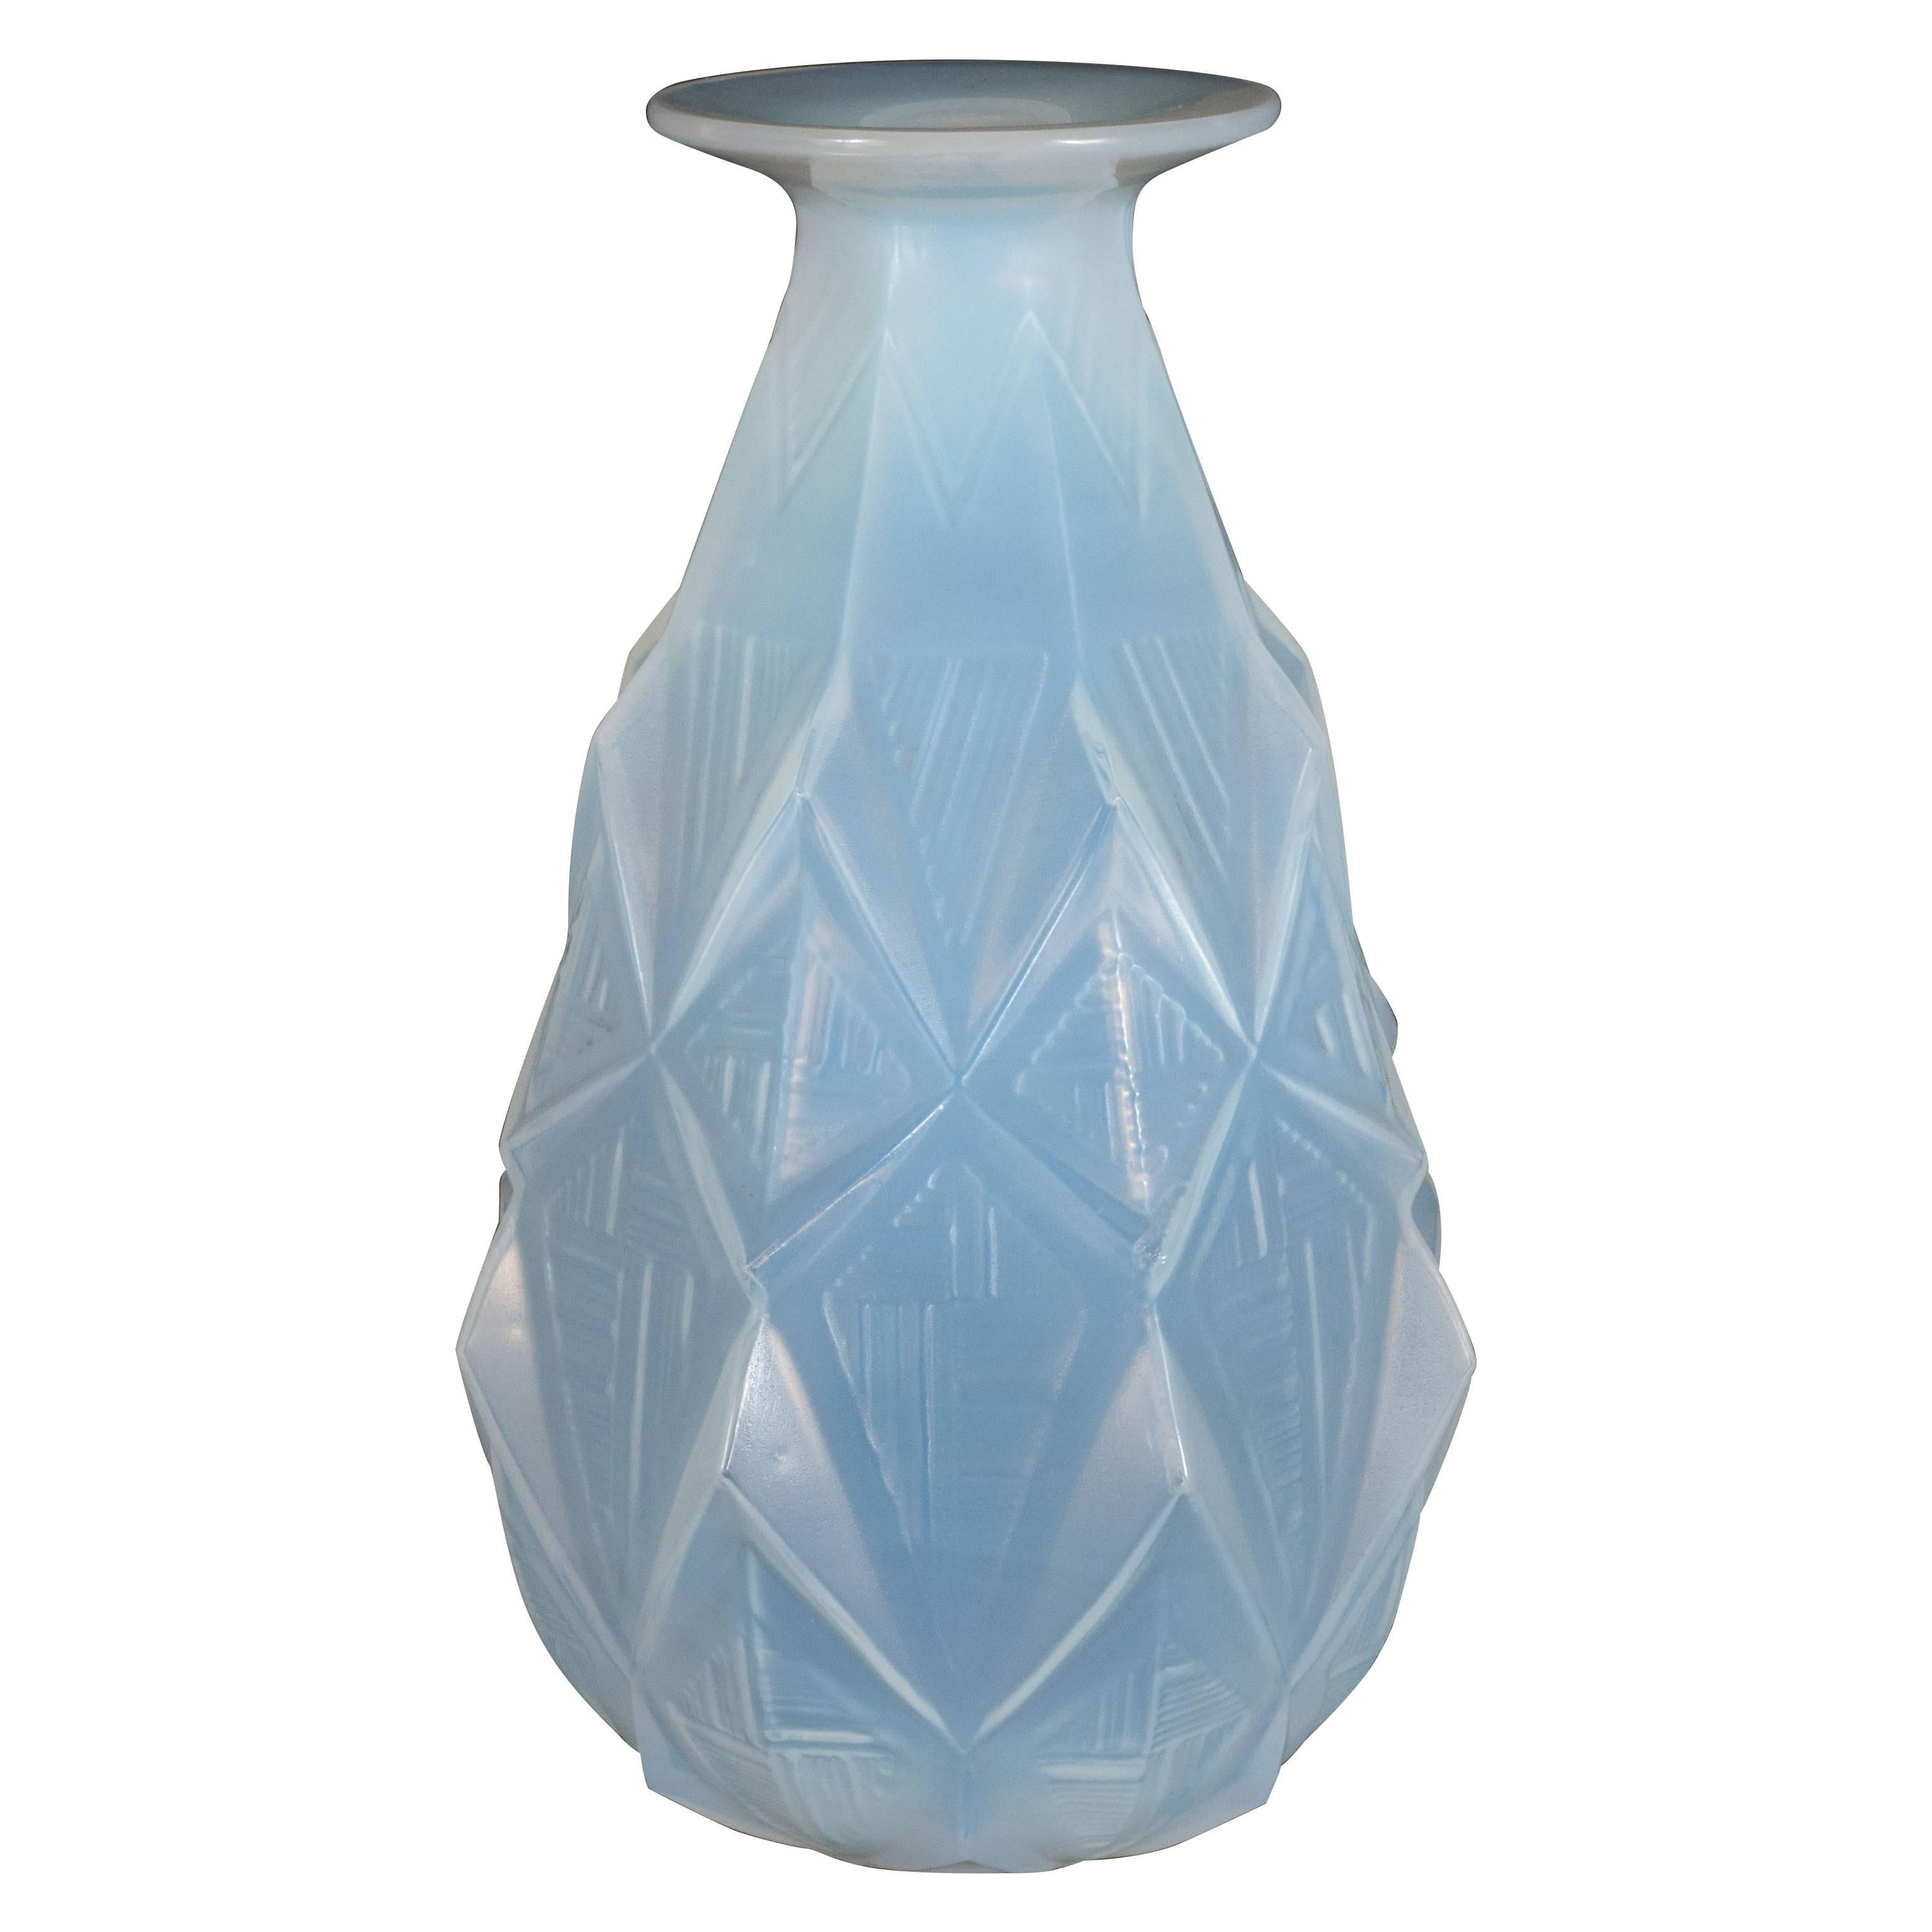 French Art Deco Opalescent Vase with Geometric Patterns in Relief Signed Sabino